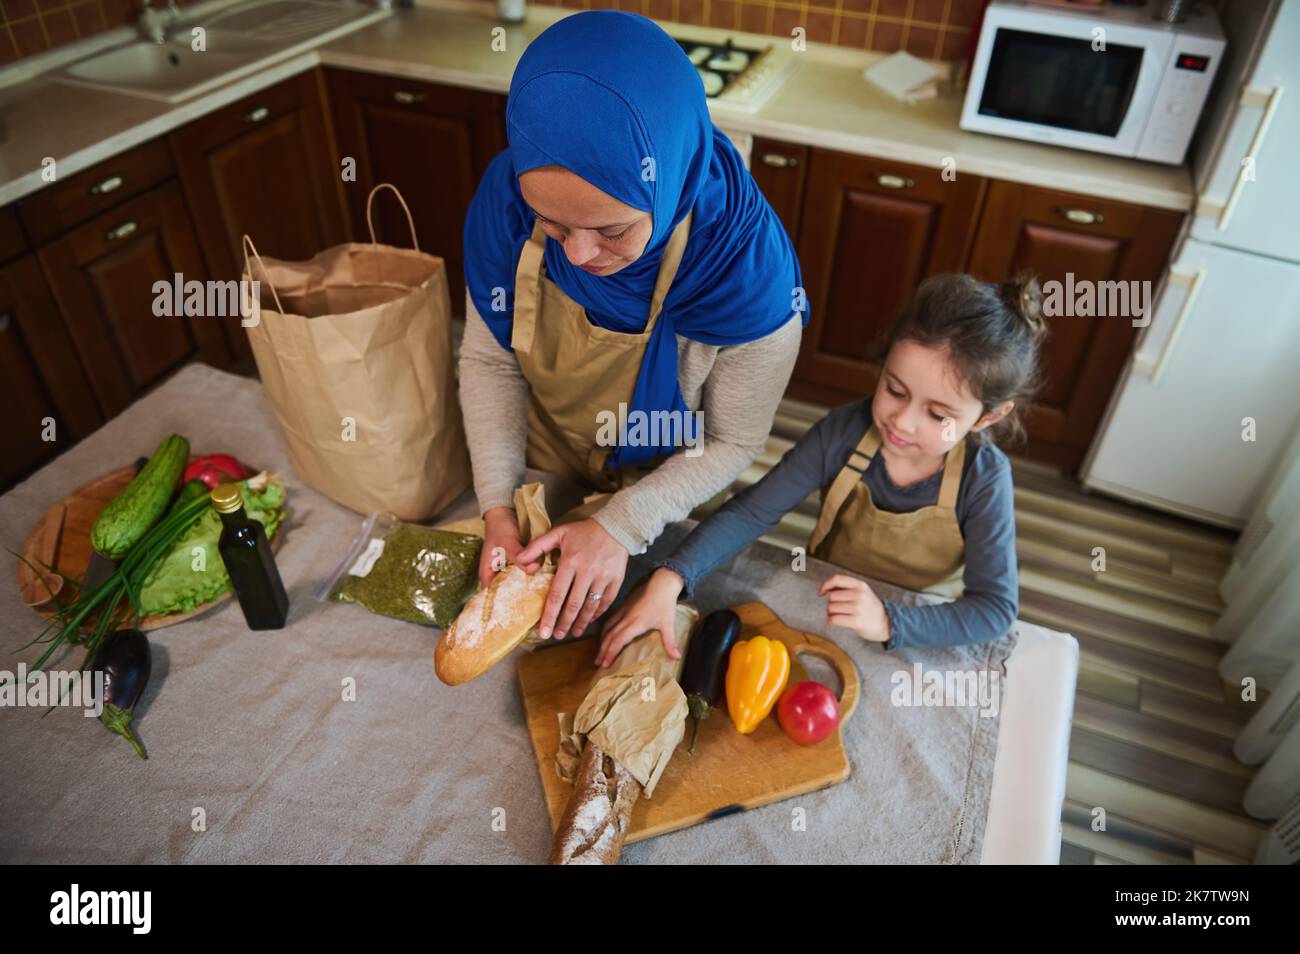 Top view. Muslim woman, loving mom with little daughter unpacking food from supermarket bag together for preparing meal Stock Photo